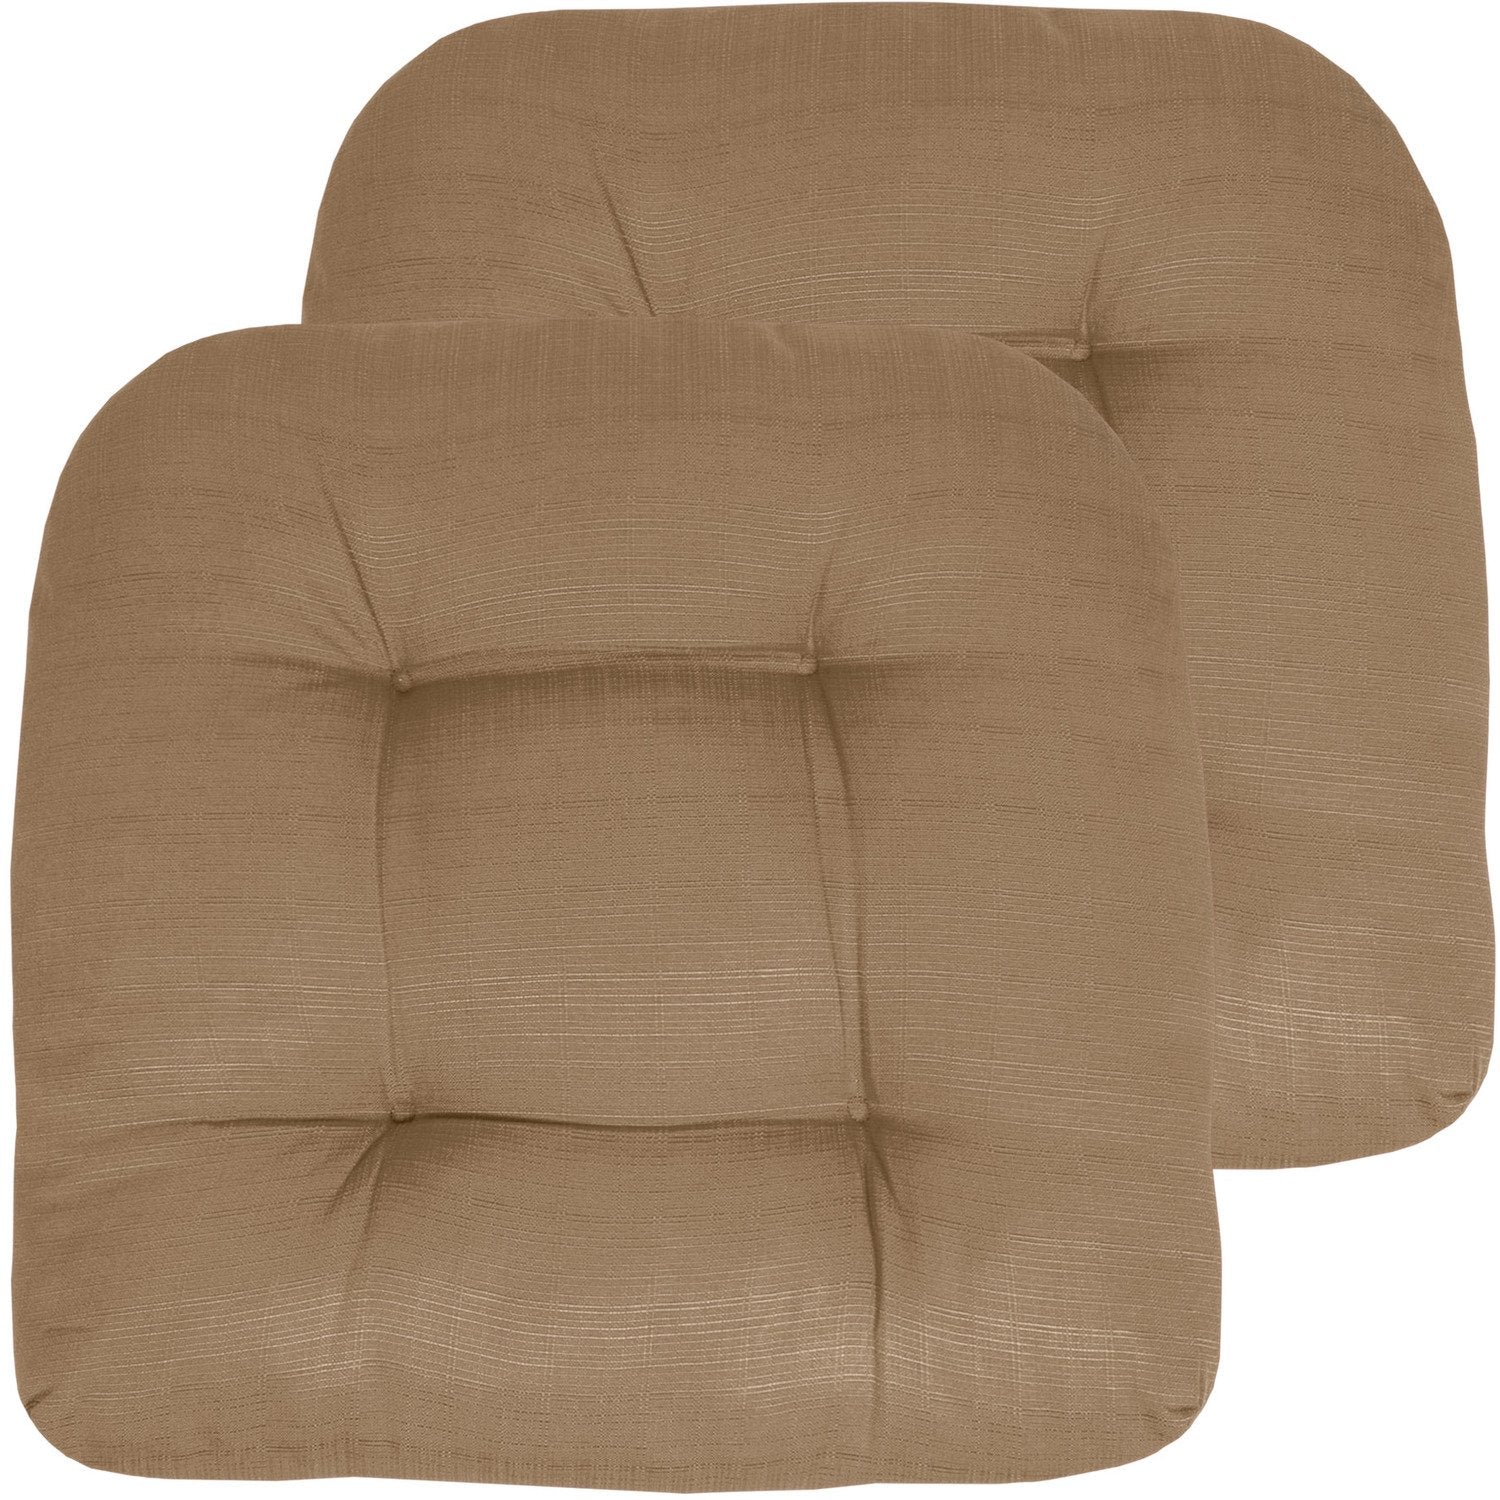 Patio Seat Cushion Set Taupe 2-Pack